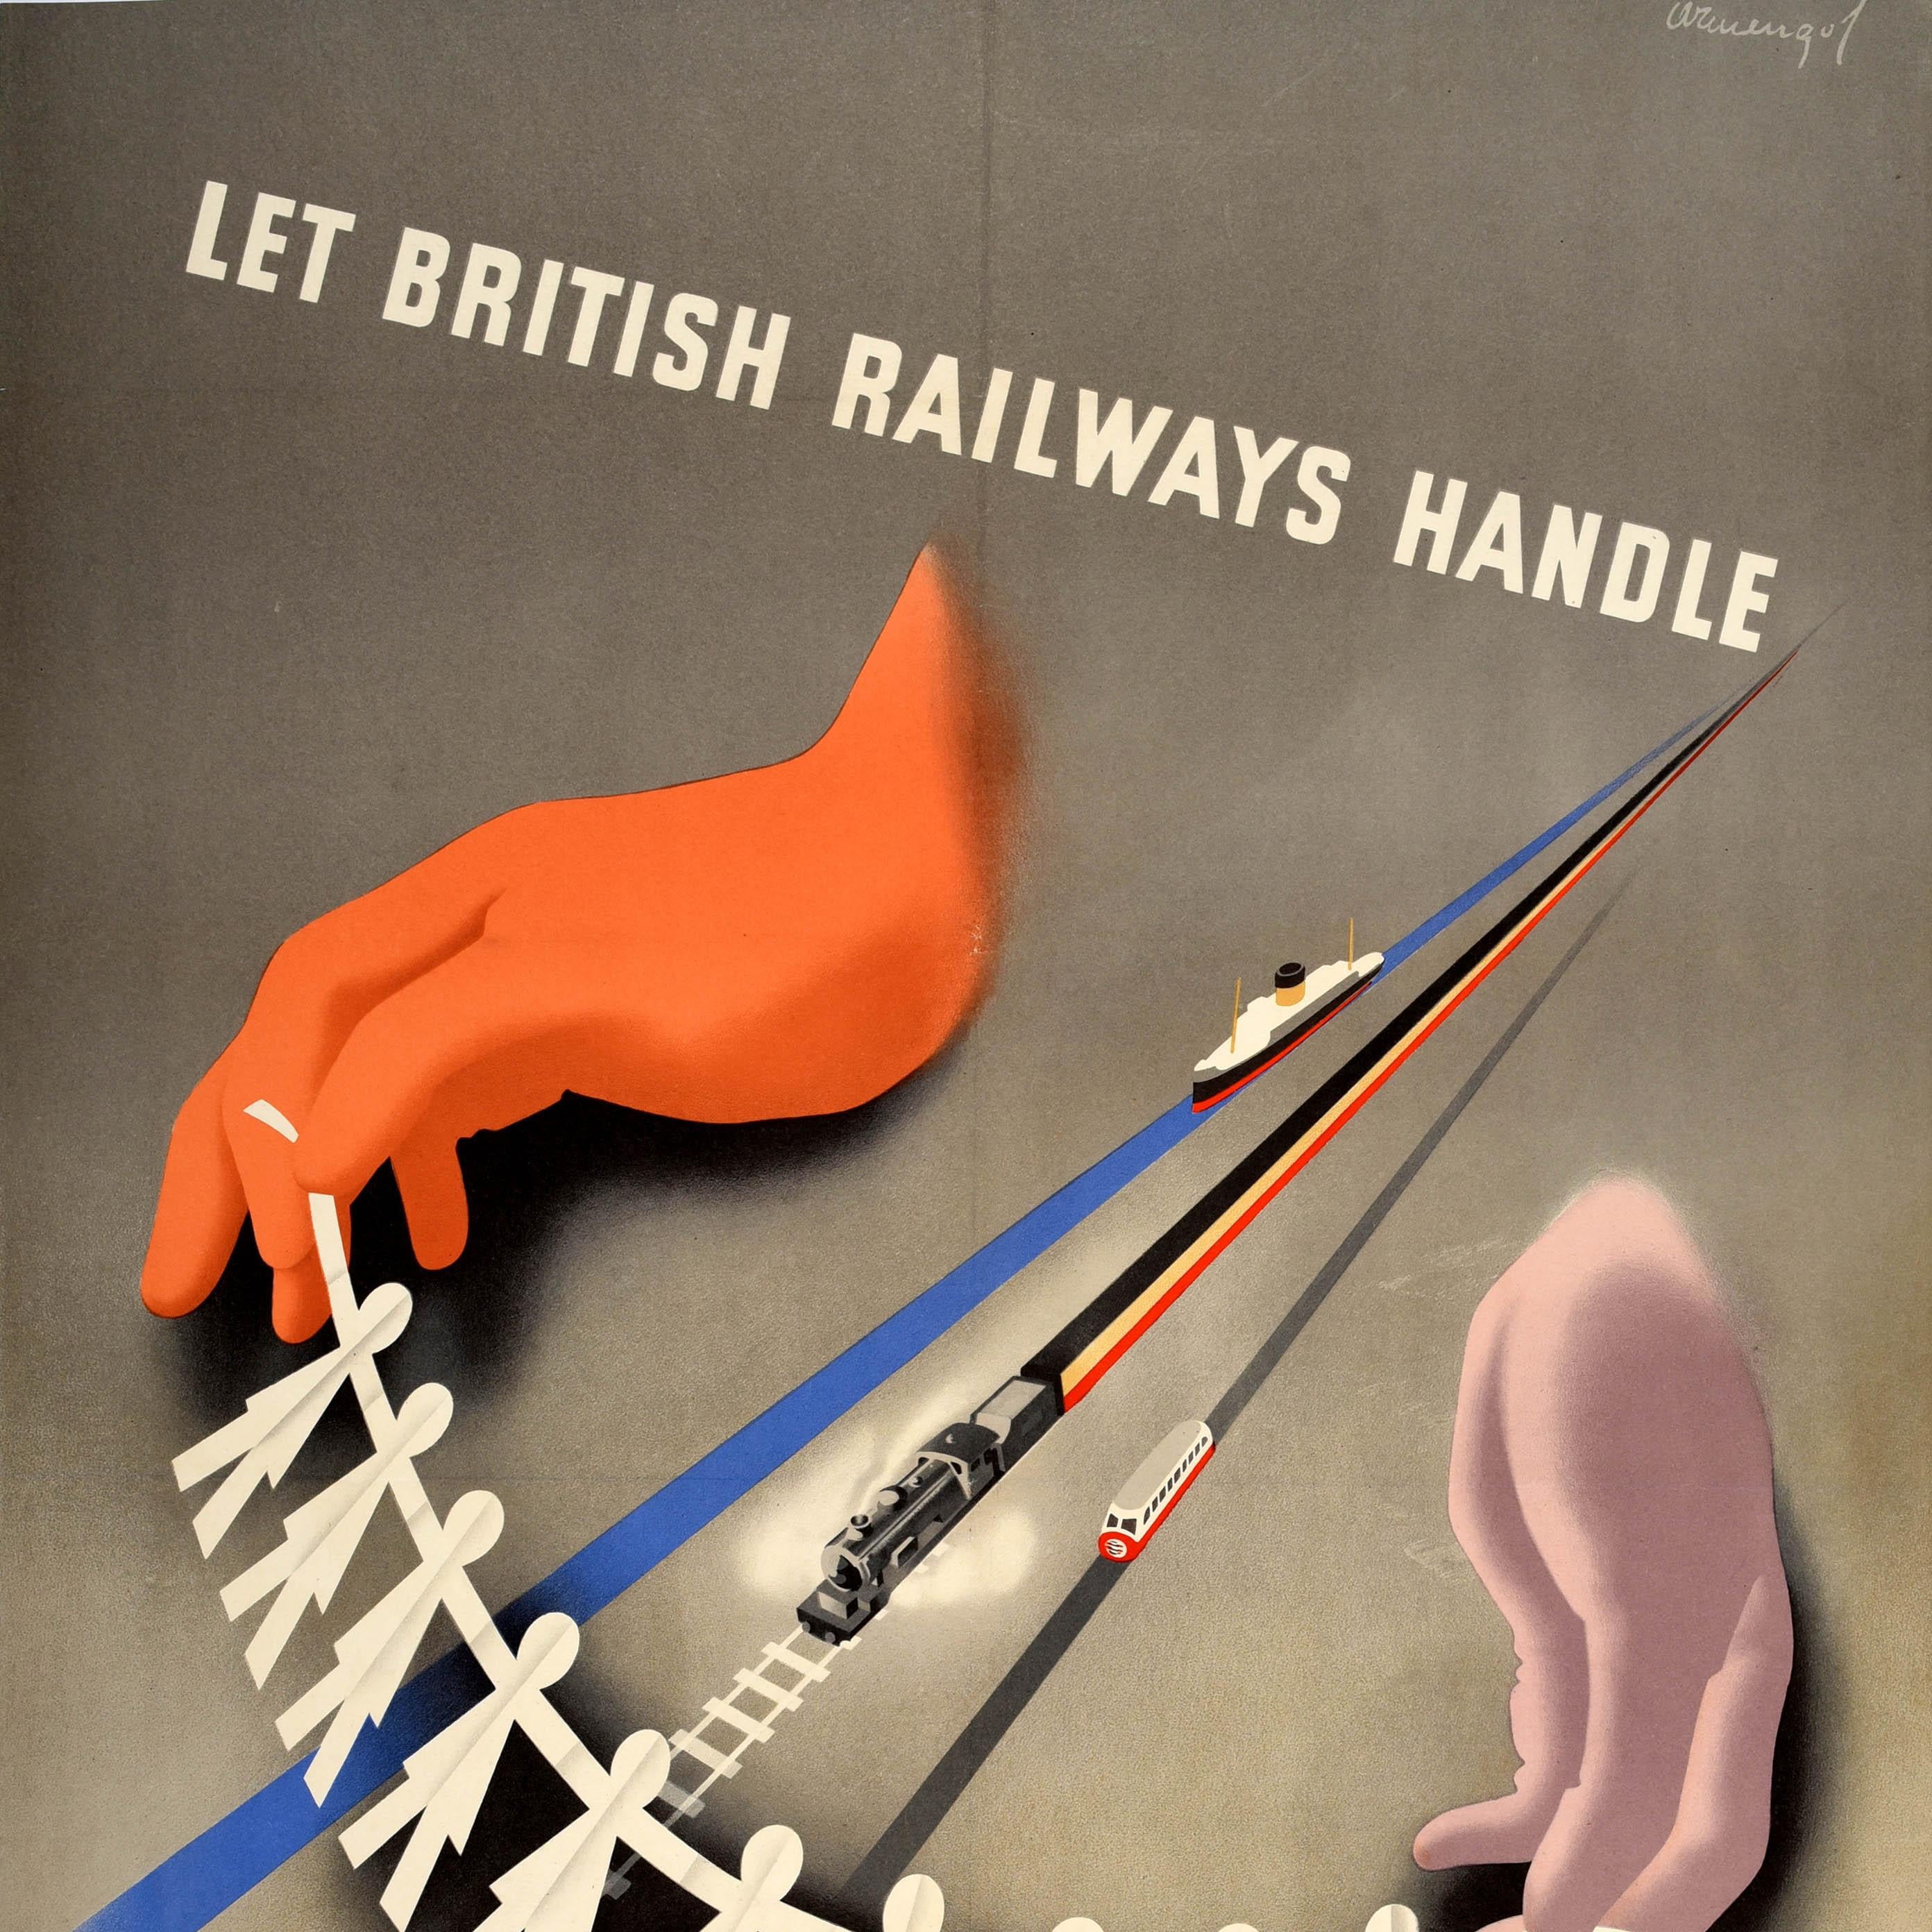 Original Vintage Travel Advertising Poster British Railways Handle Party Outing  - Brown Print by Unknown